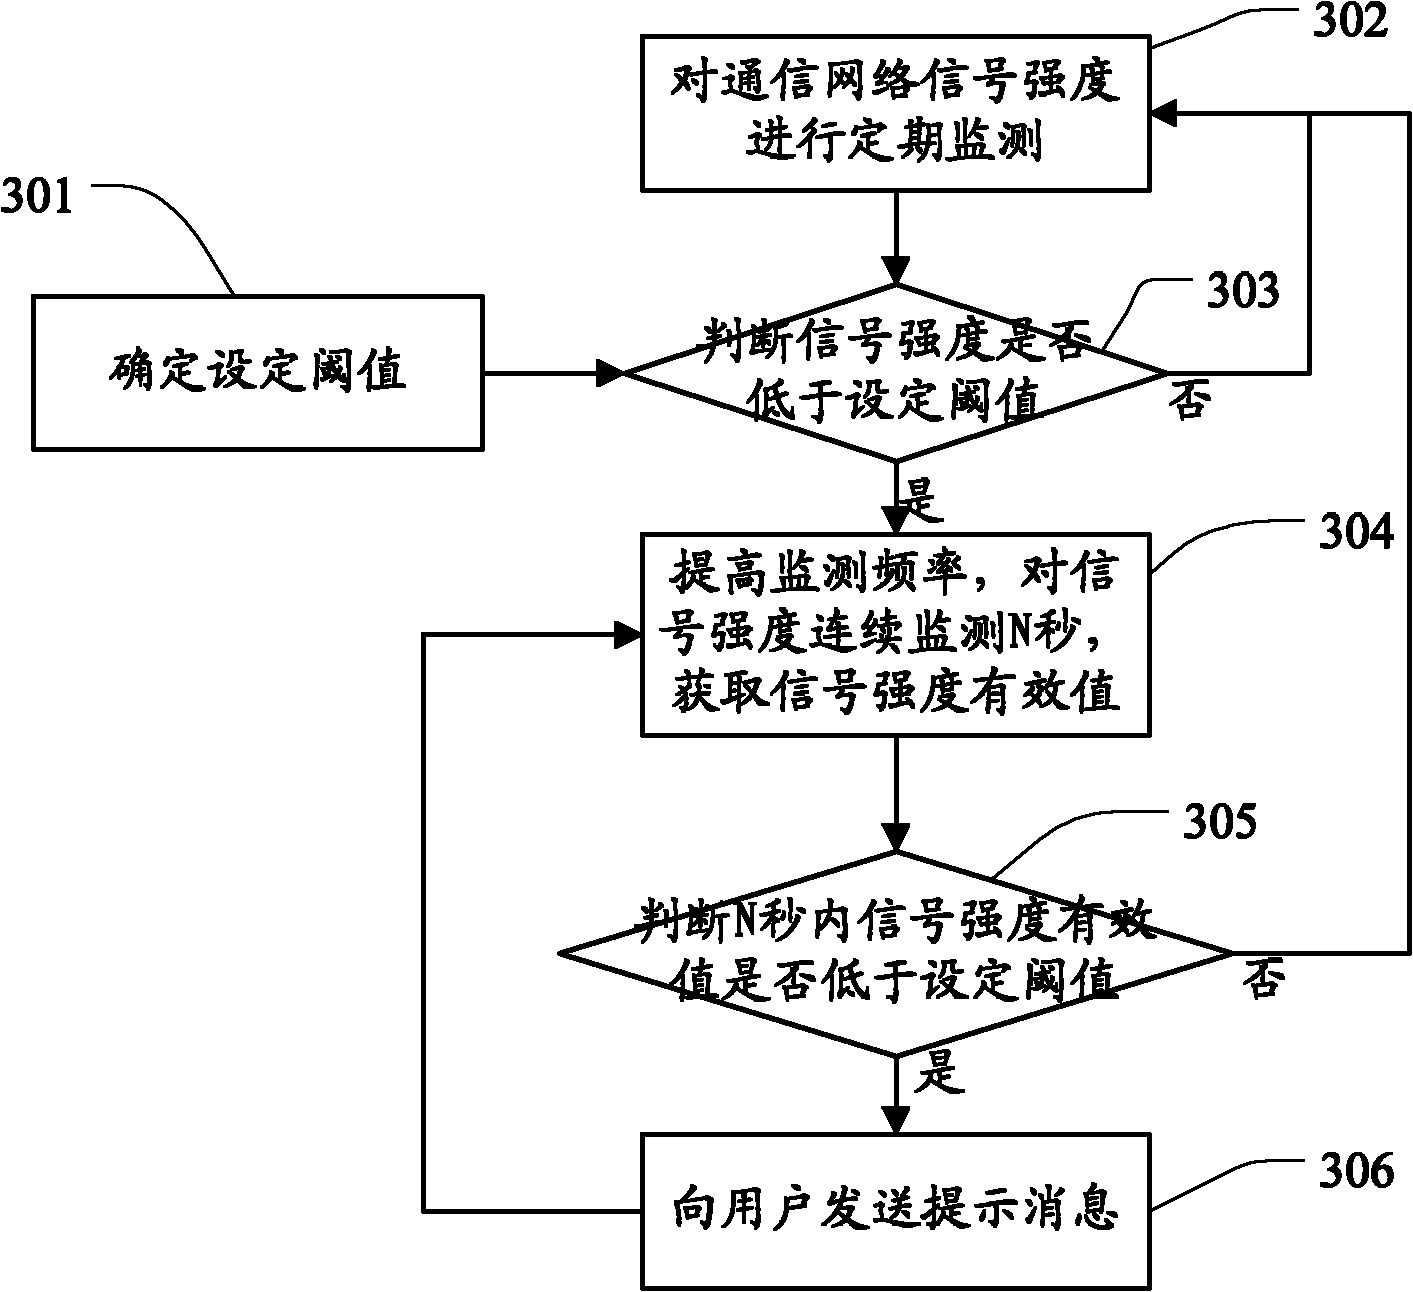 Method and system for prompting signal intensity